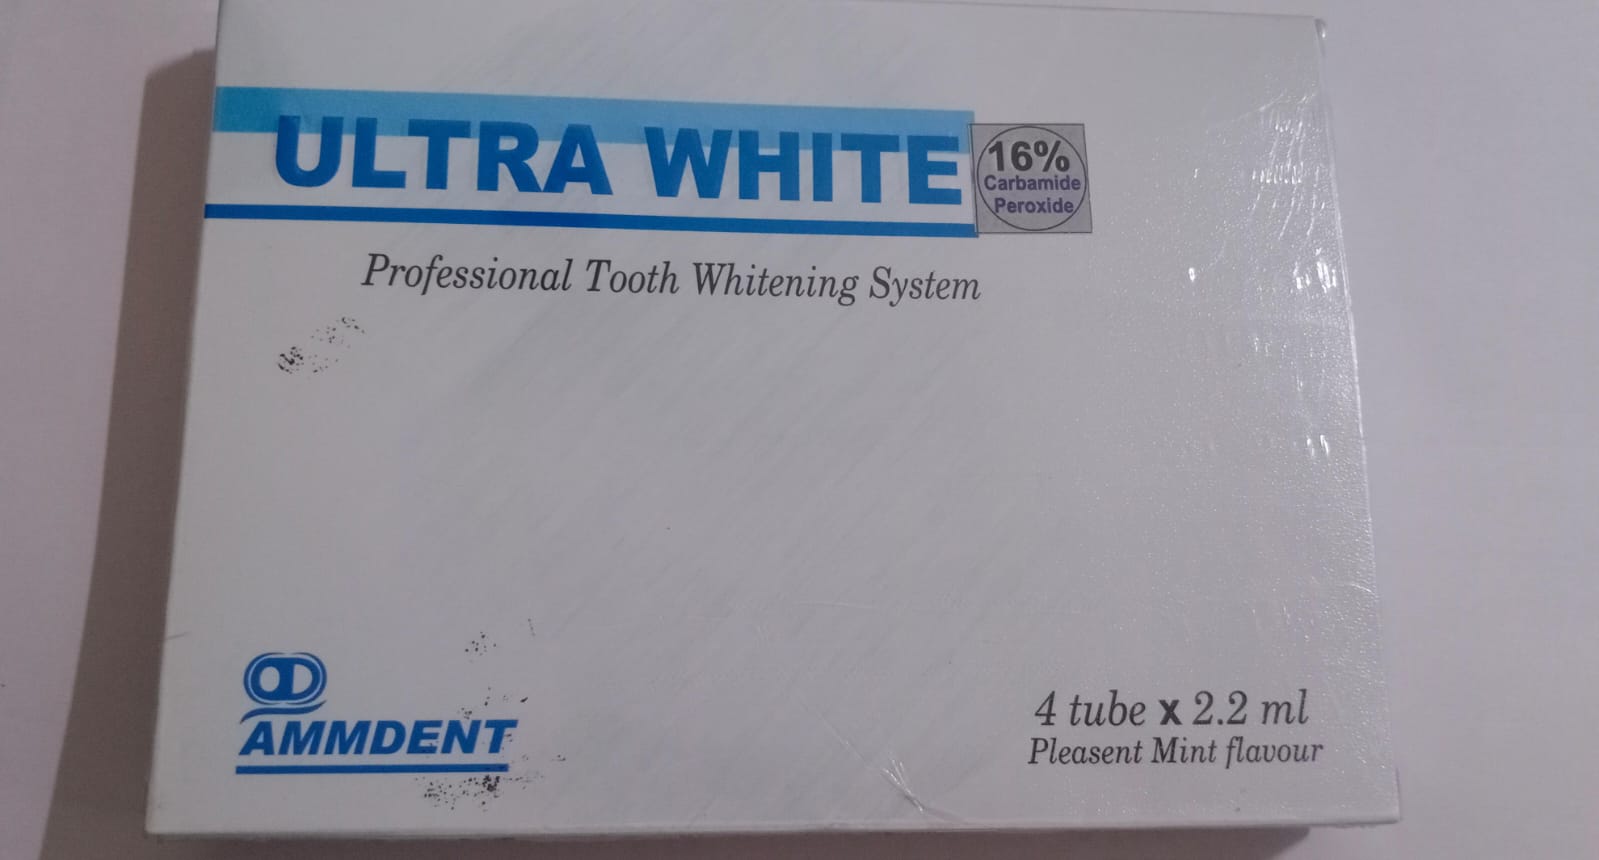 Ammdent Ultra White Bleaching Gel (Professional Tooth Whitening System)